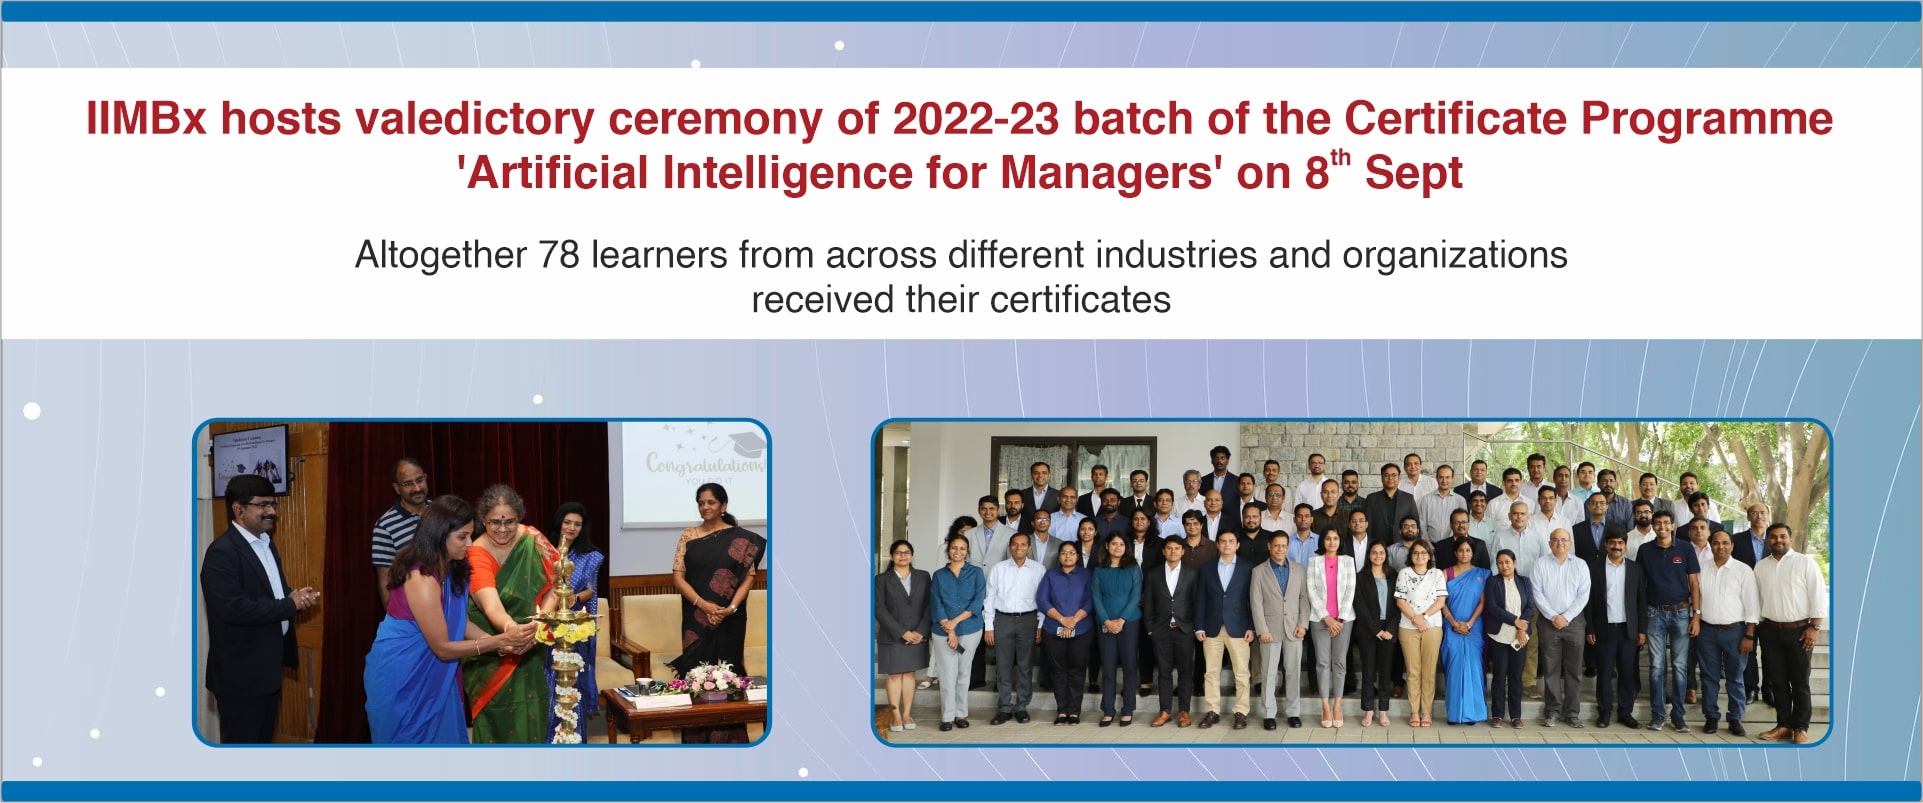 IIMBx hosts valedictory ceremony of 2022-23 batch of the Certificate Programme ‘Artificial Intelligence for Managers’ on 8th Sept